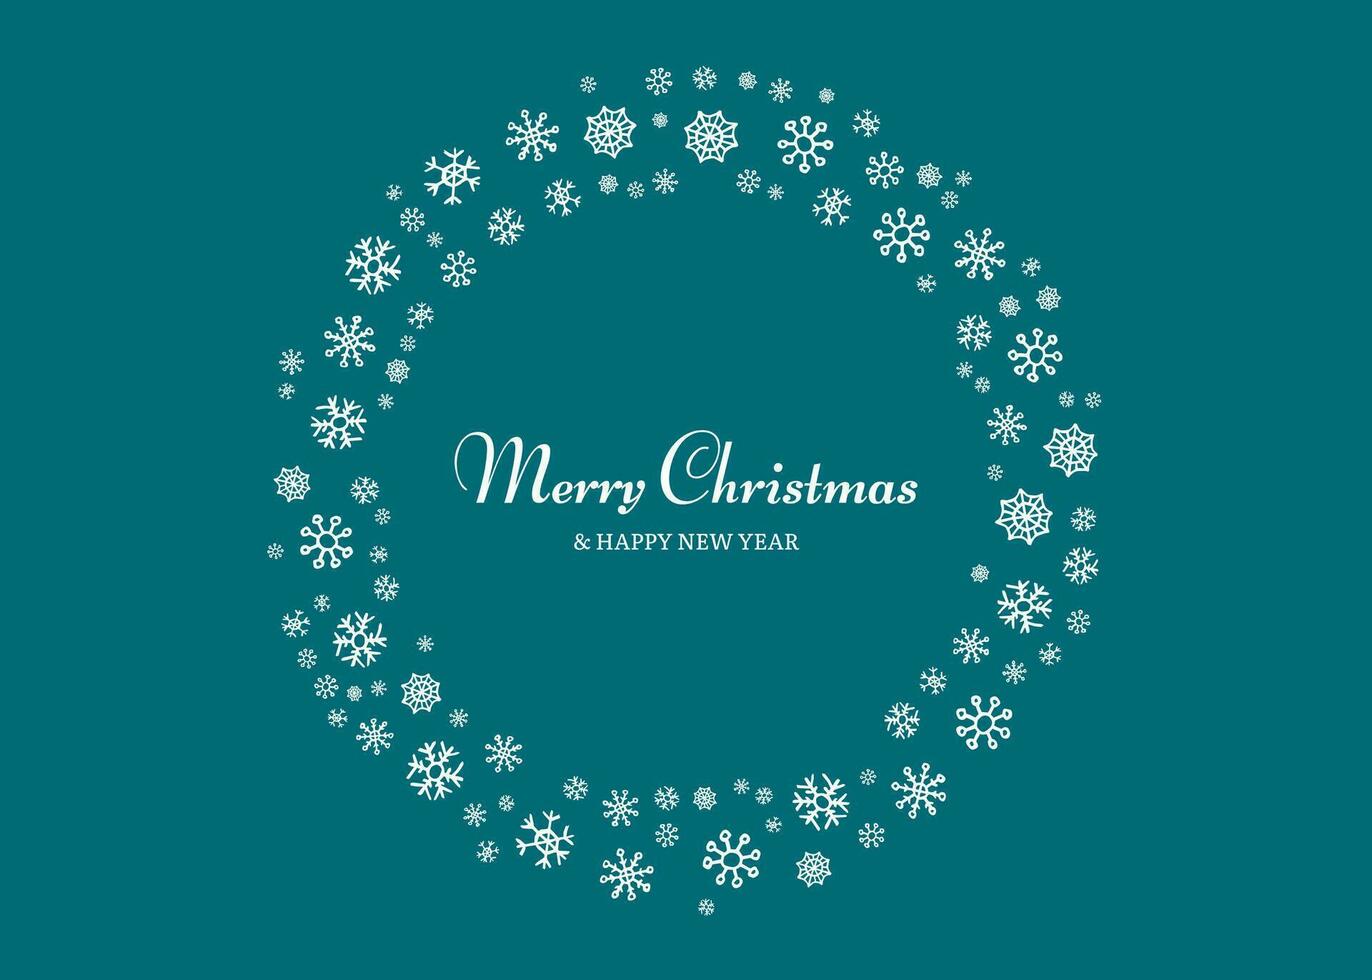 Merry Christmas background with snowflakes in circle vector